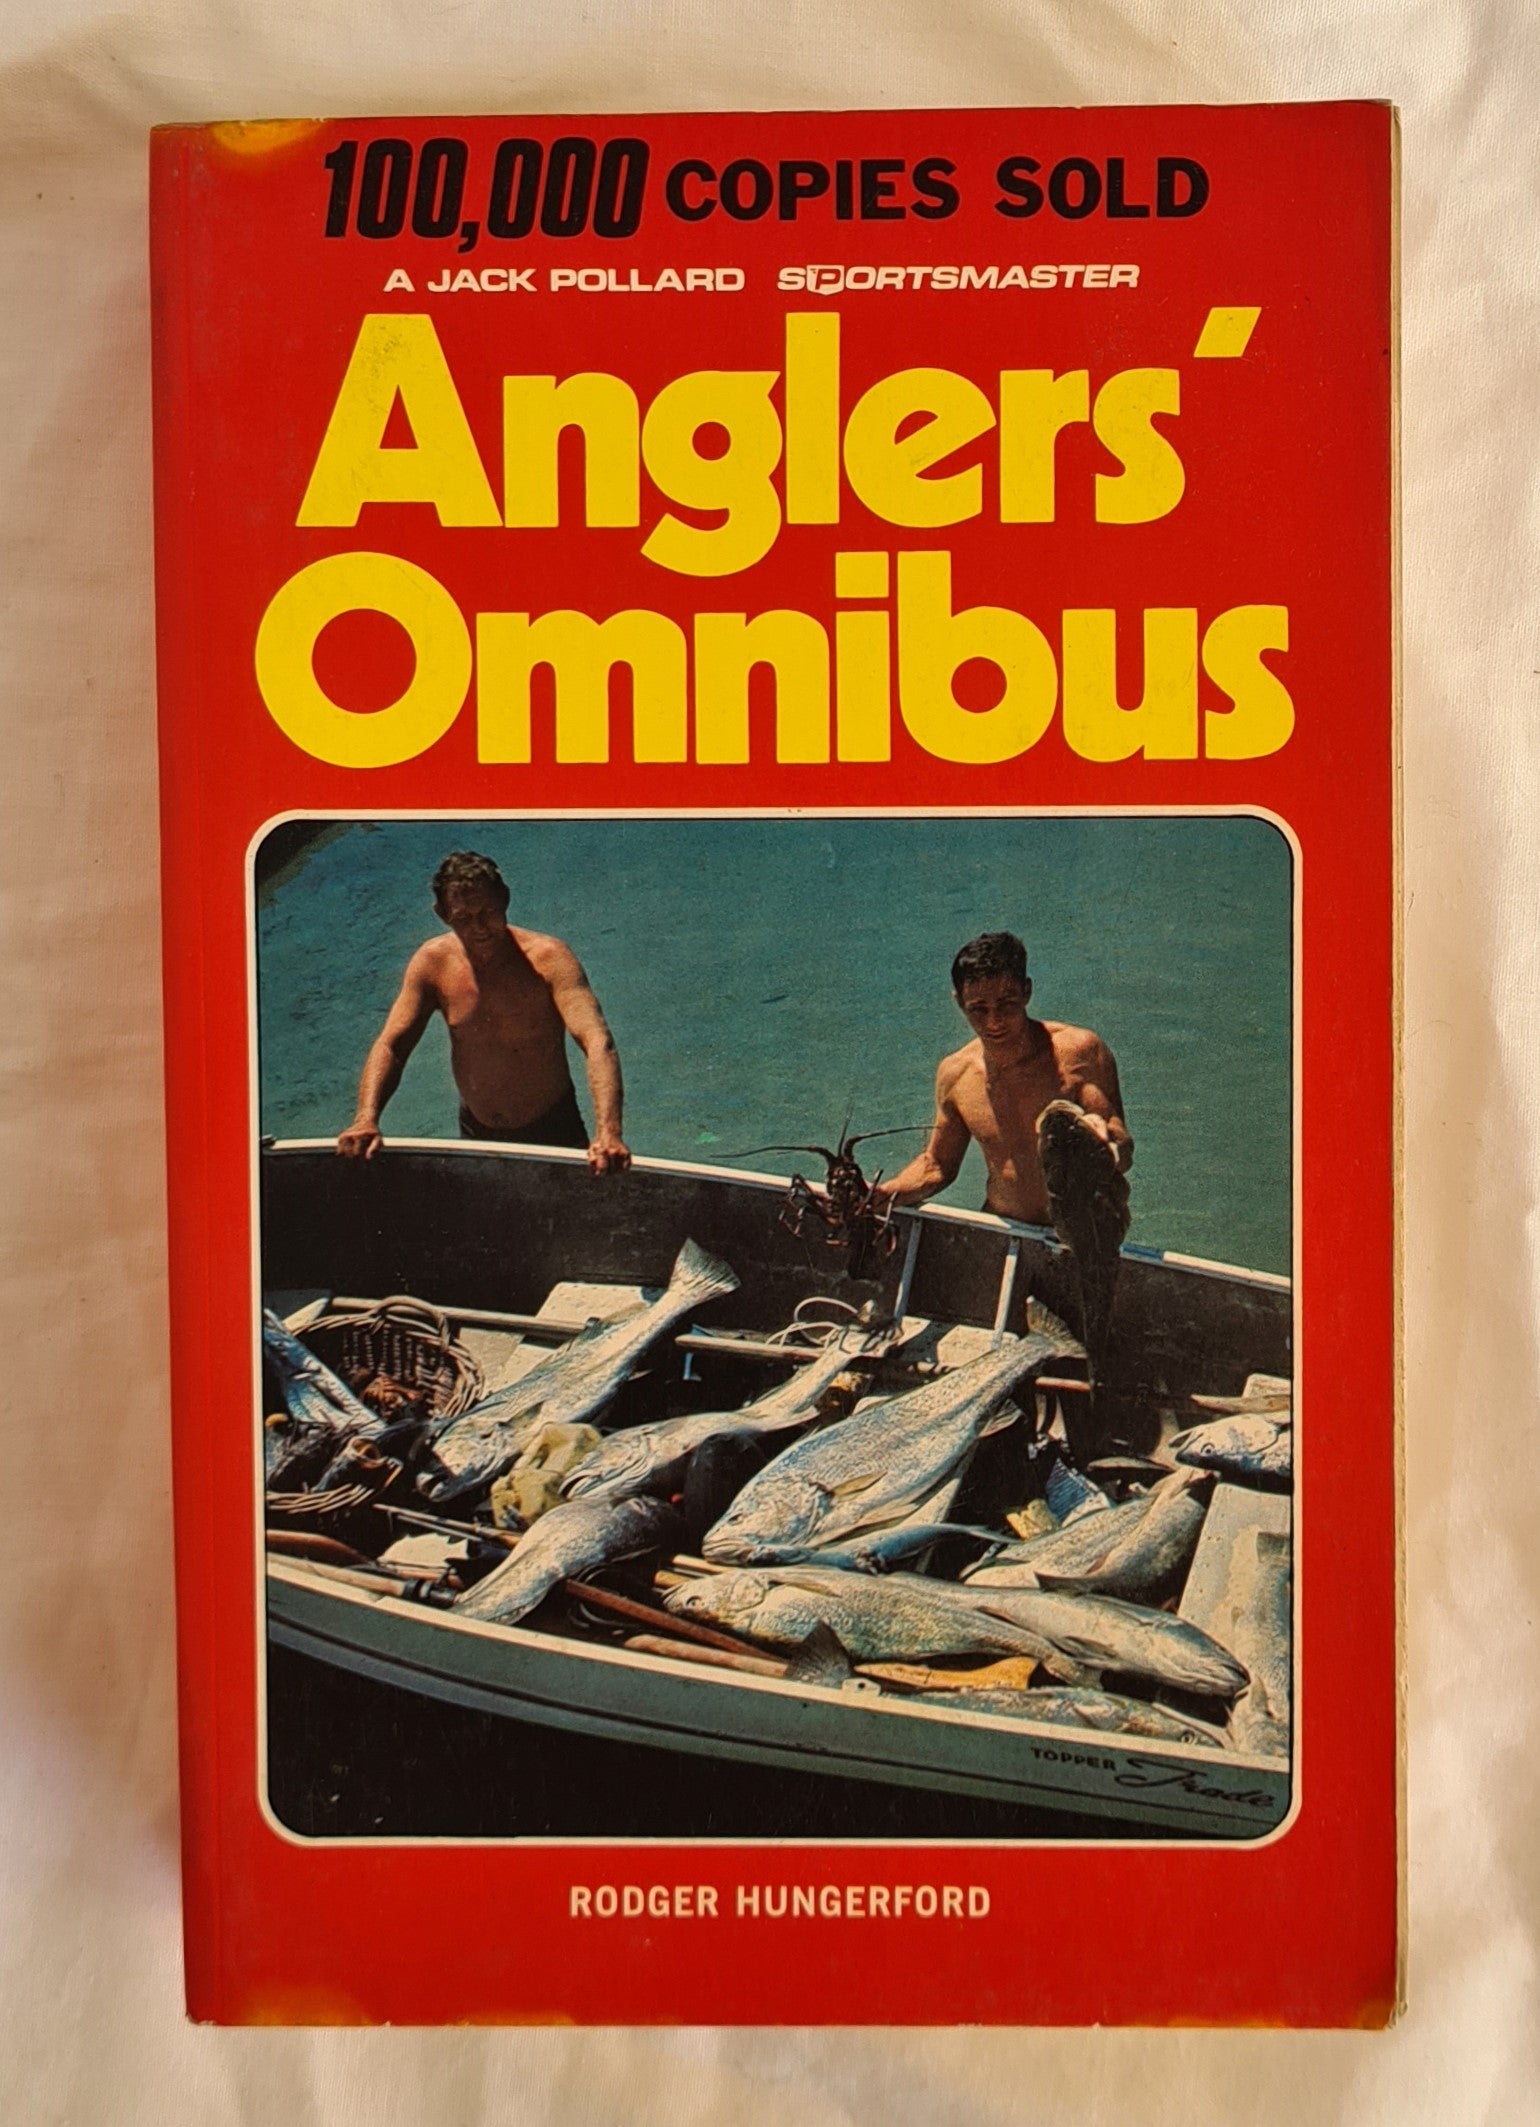 Anglers’ Omnibus by Rodger Hungerford